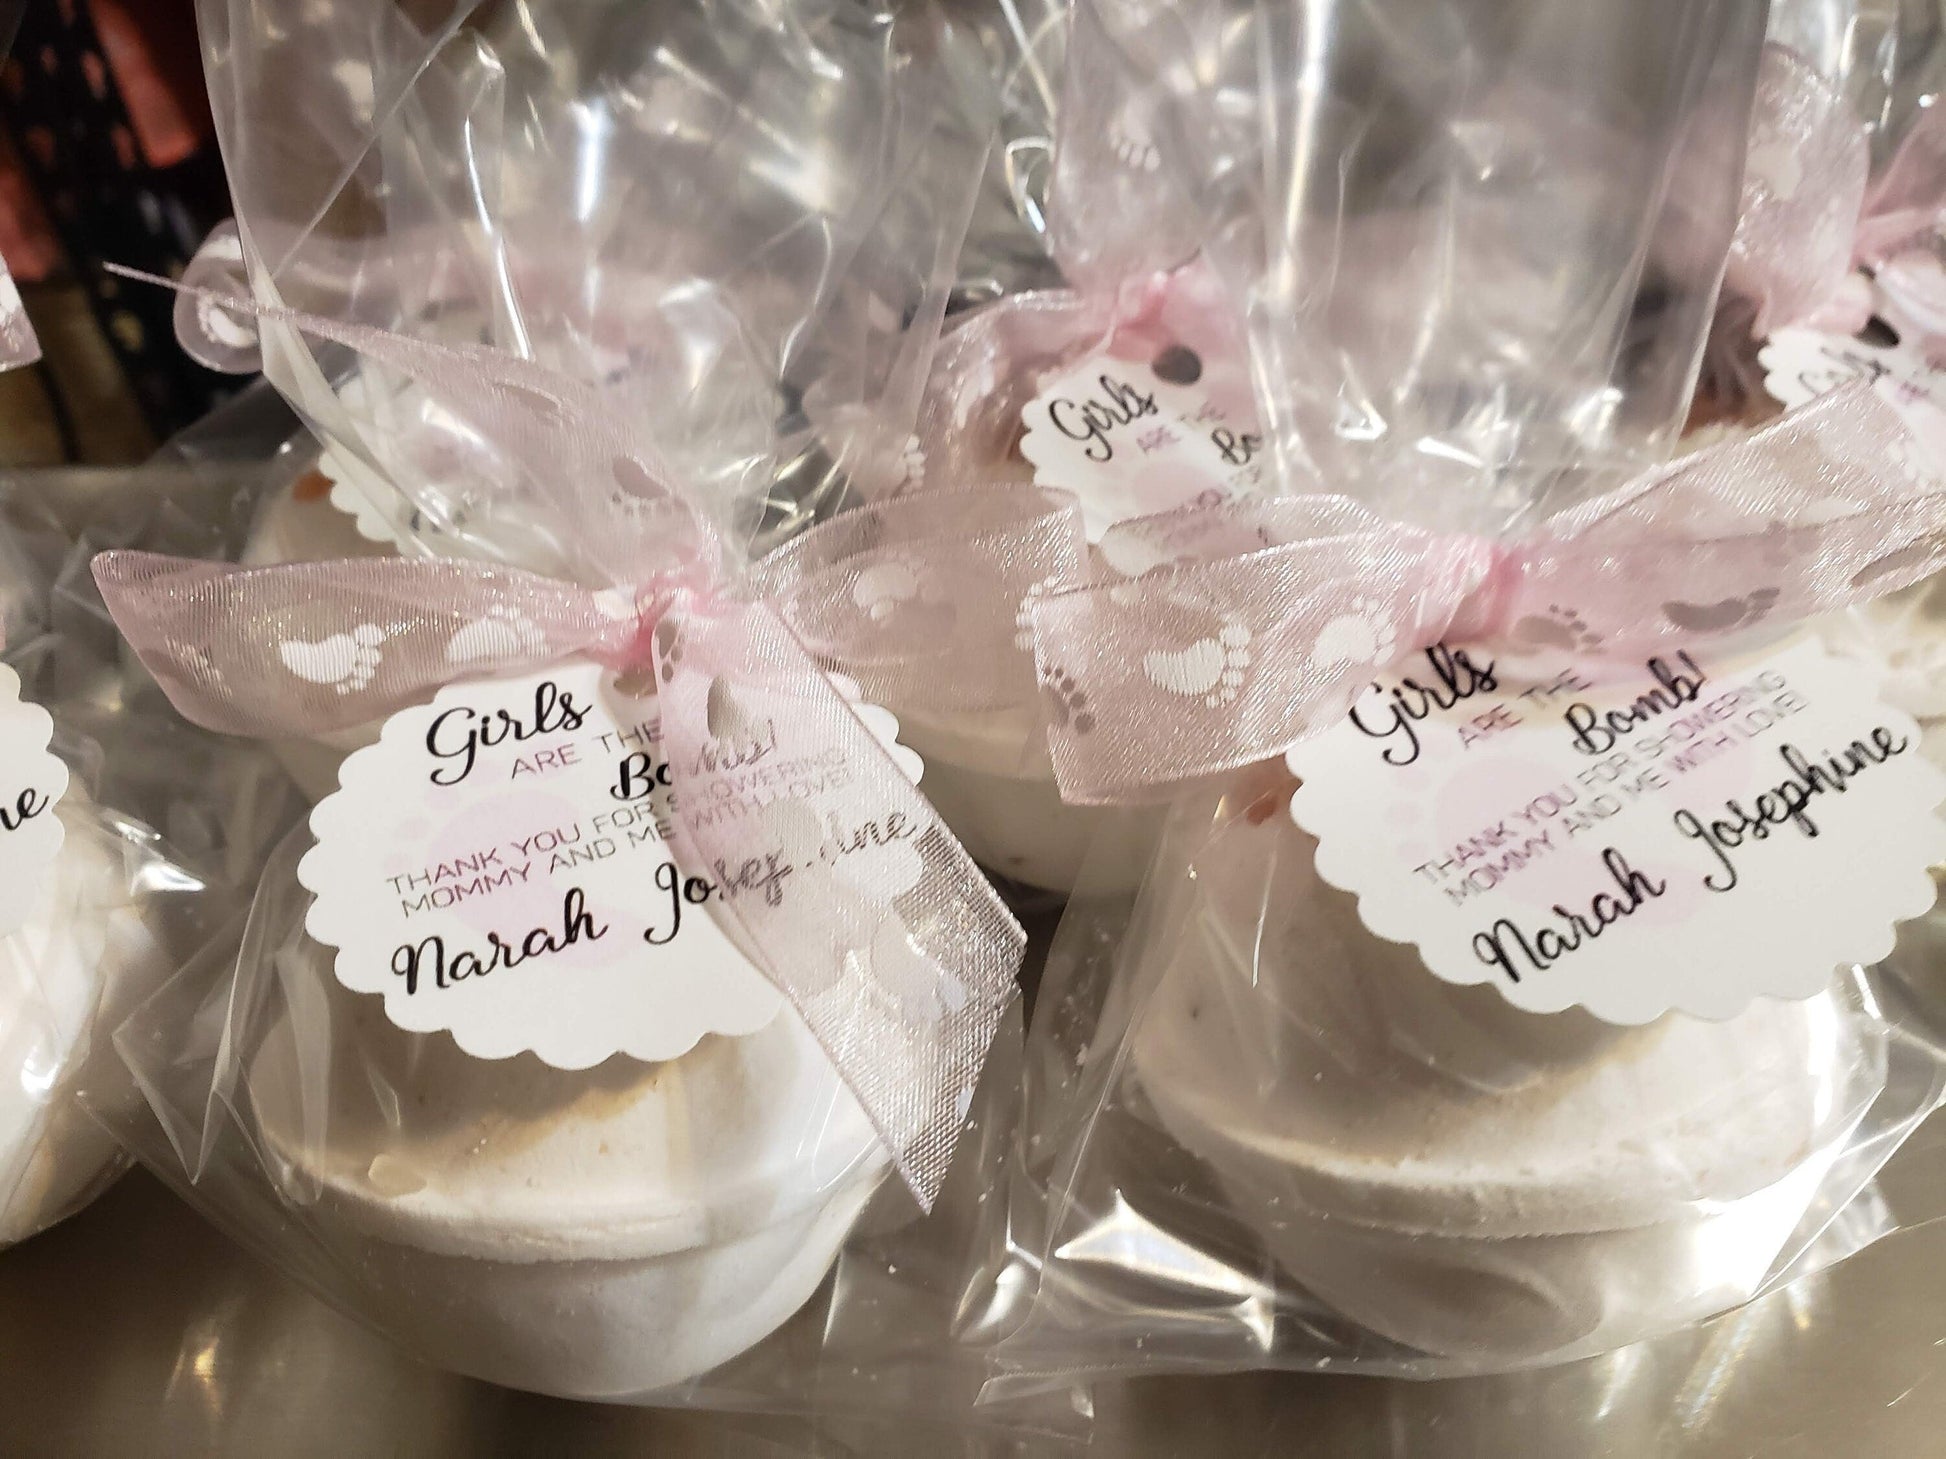 Ivy Creek Girls Are The Bomb Pink Himalayan Salt Bath Bomb - Baby Shower Favors - Stress Relief - Bath Bombs - Bath and Body - Bath Fizzies